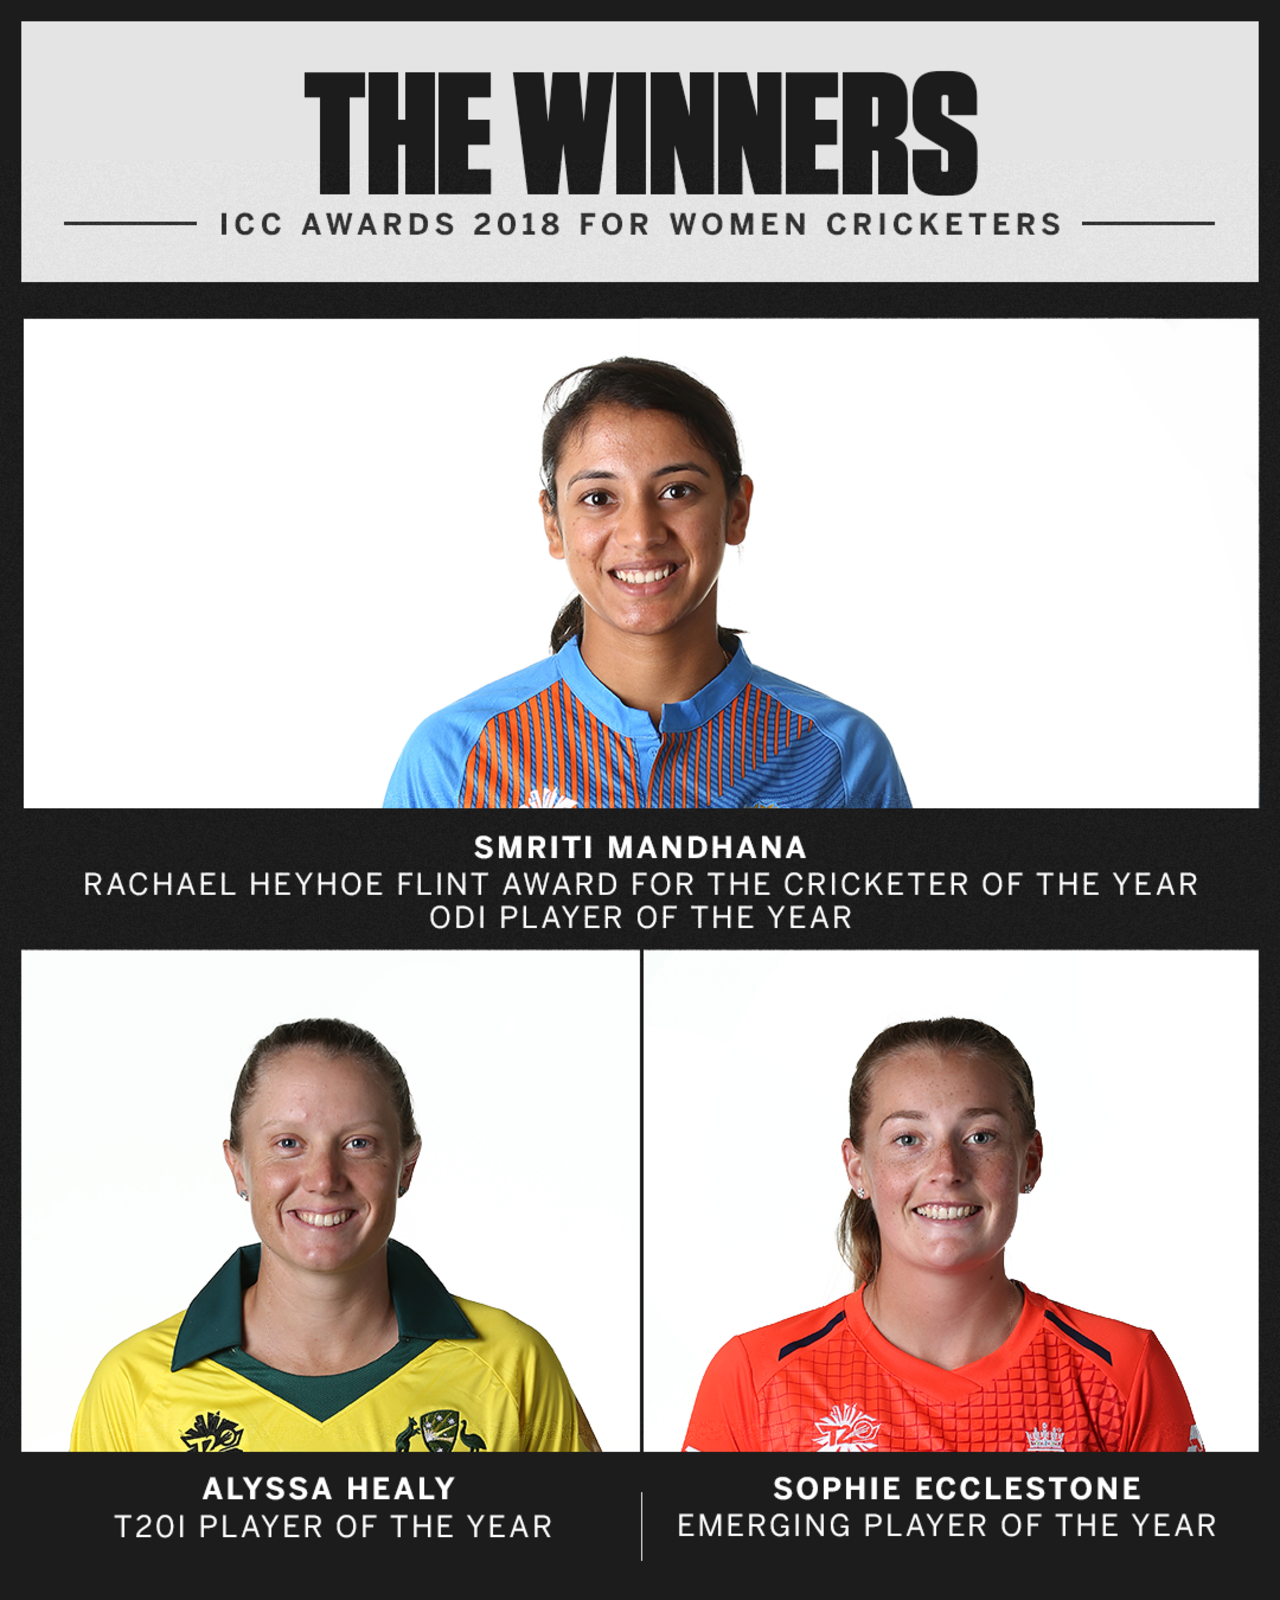 Smriti Mandhana, Alyssa Healy and Sophie Ecclestone were named the ICC top women's cricketers in 2018